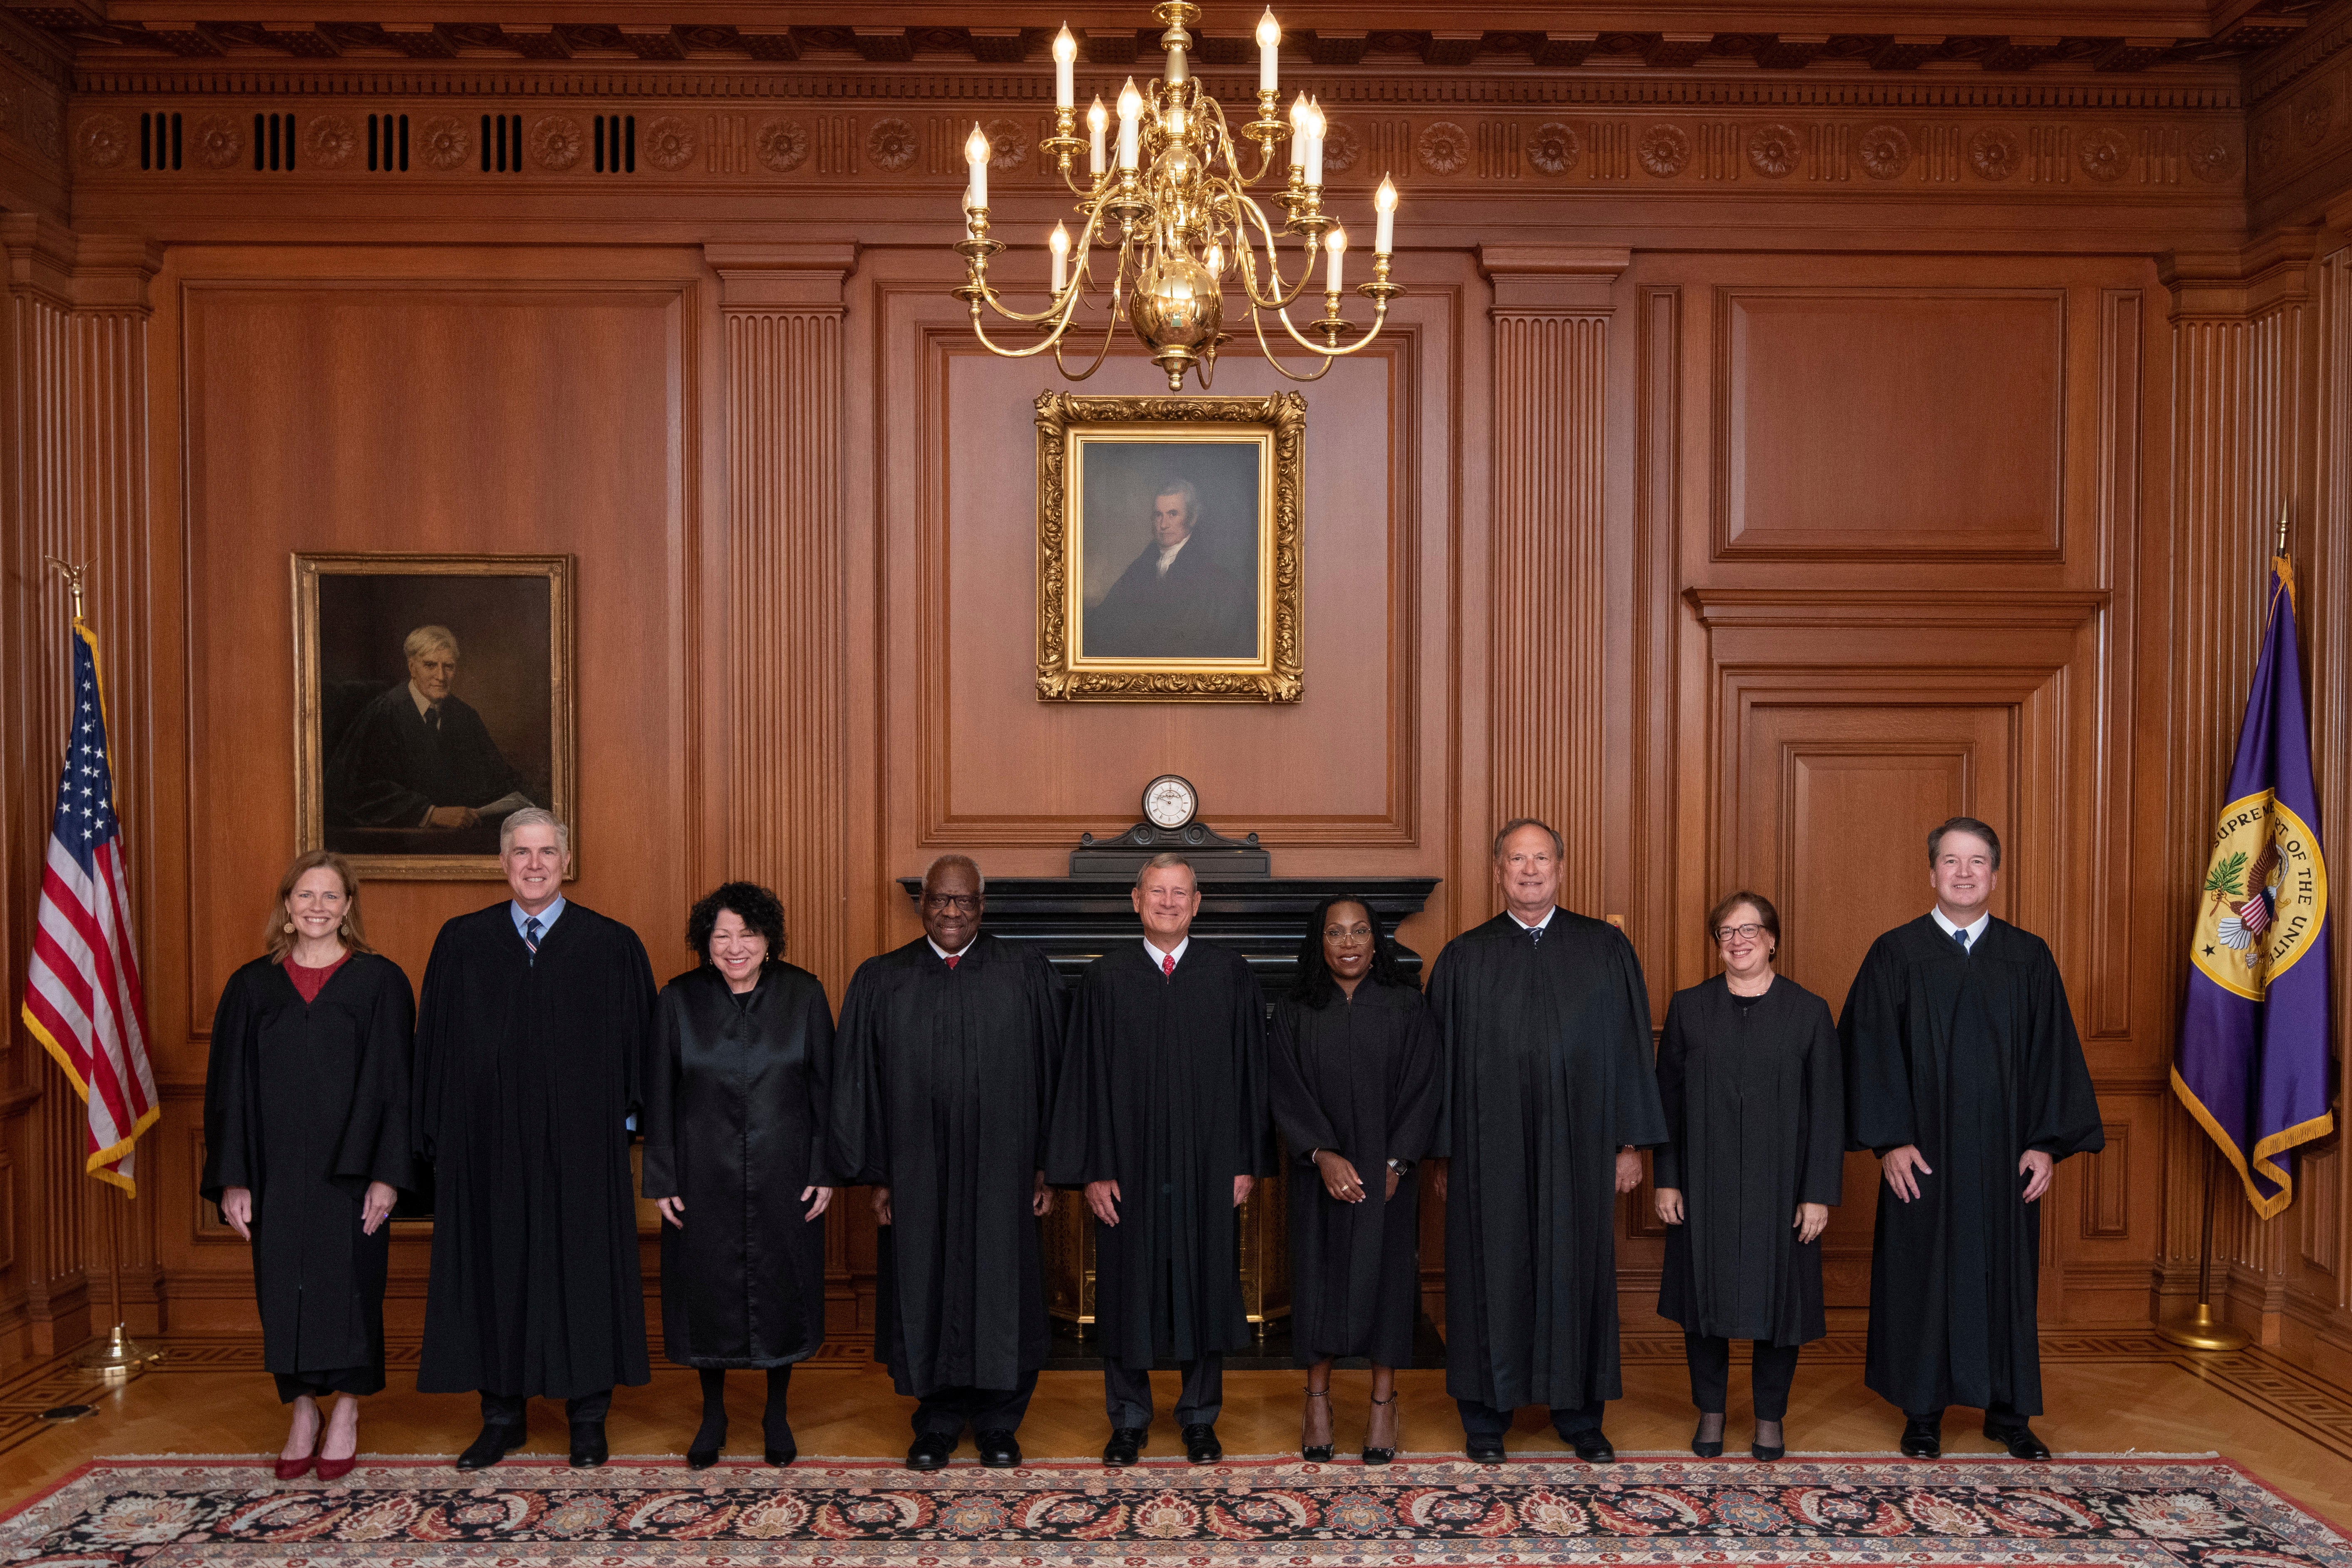 Members of the Supreme Court pose for a photo during Associate Justice Ketanji Brown Jackson's formal investiture ceremony at the Supreme Court in Washington on 30 September